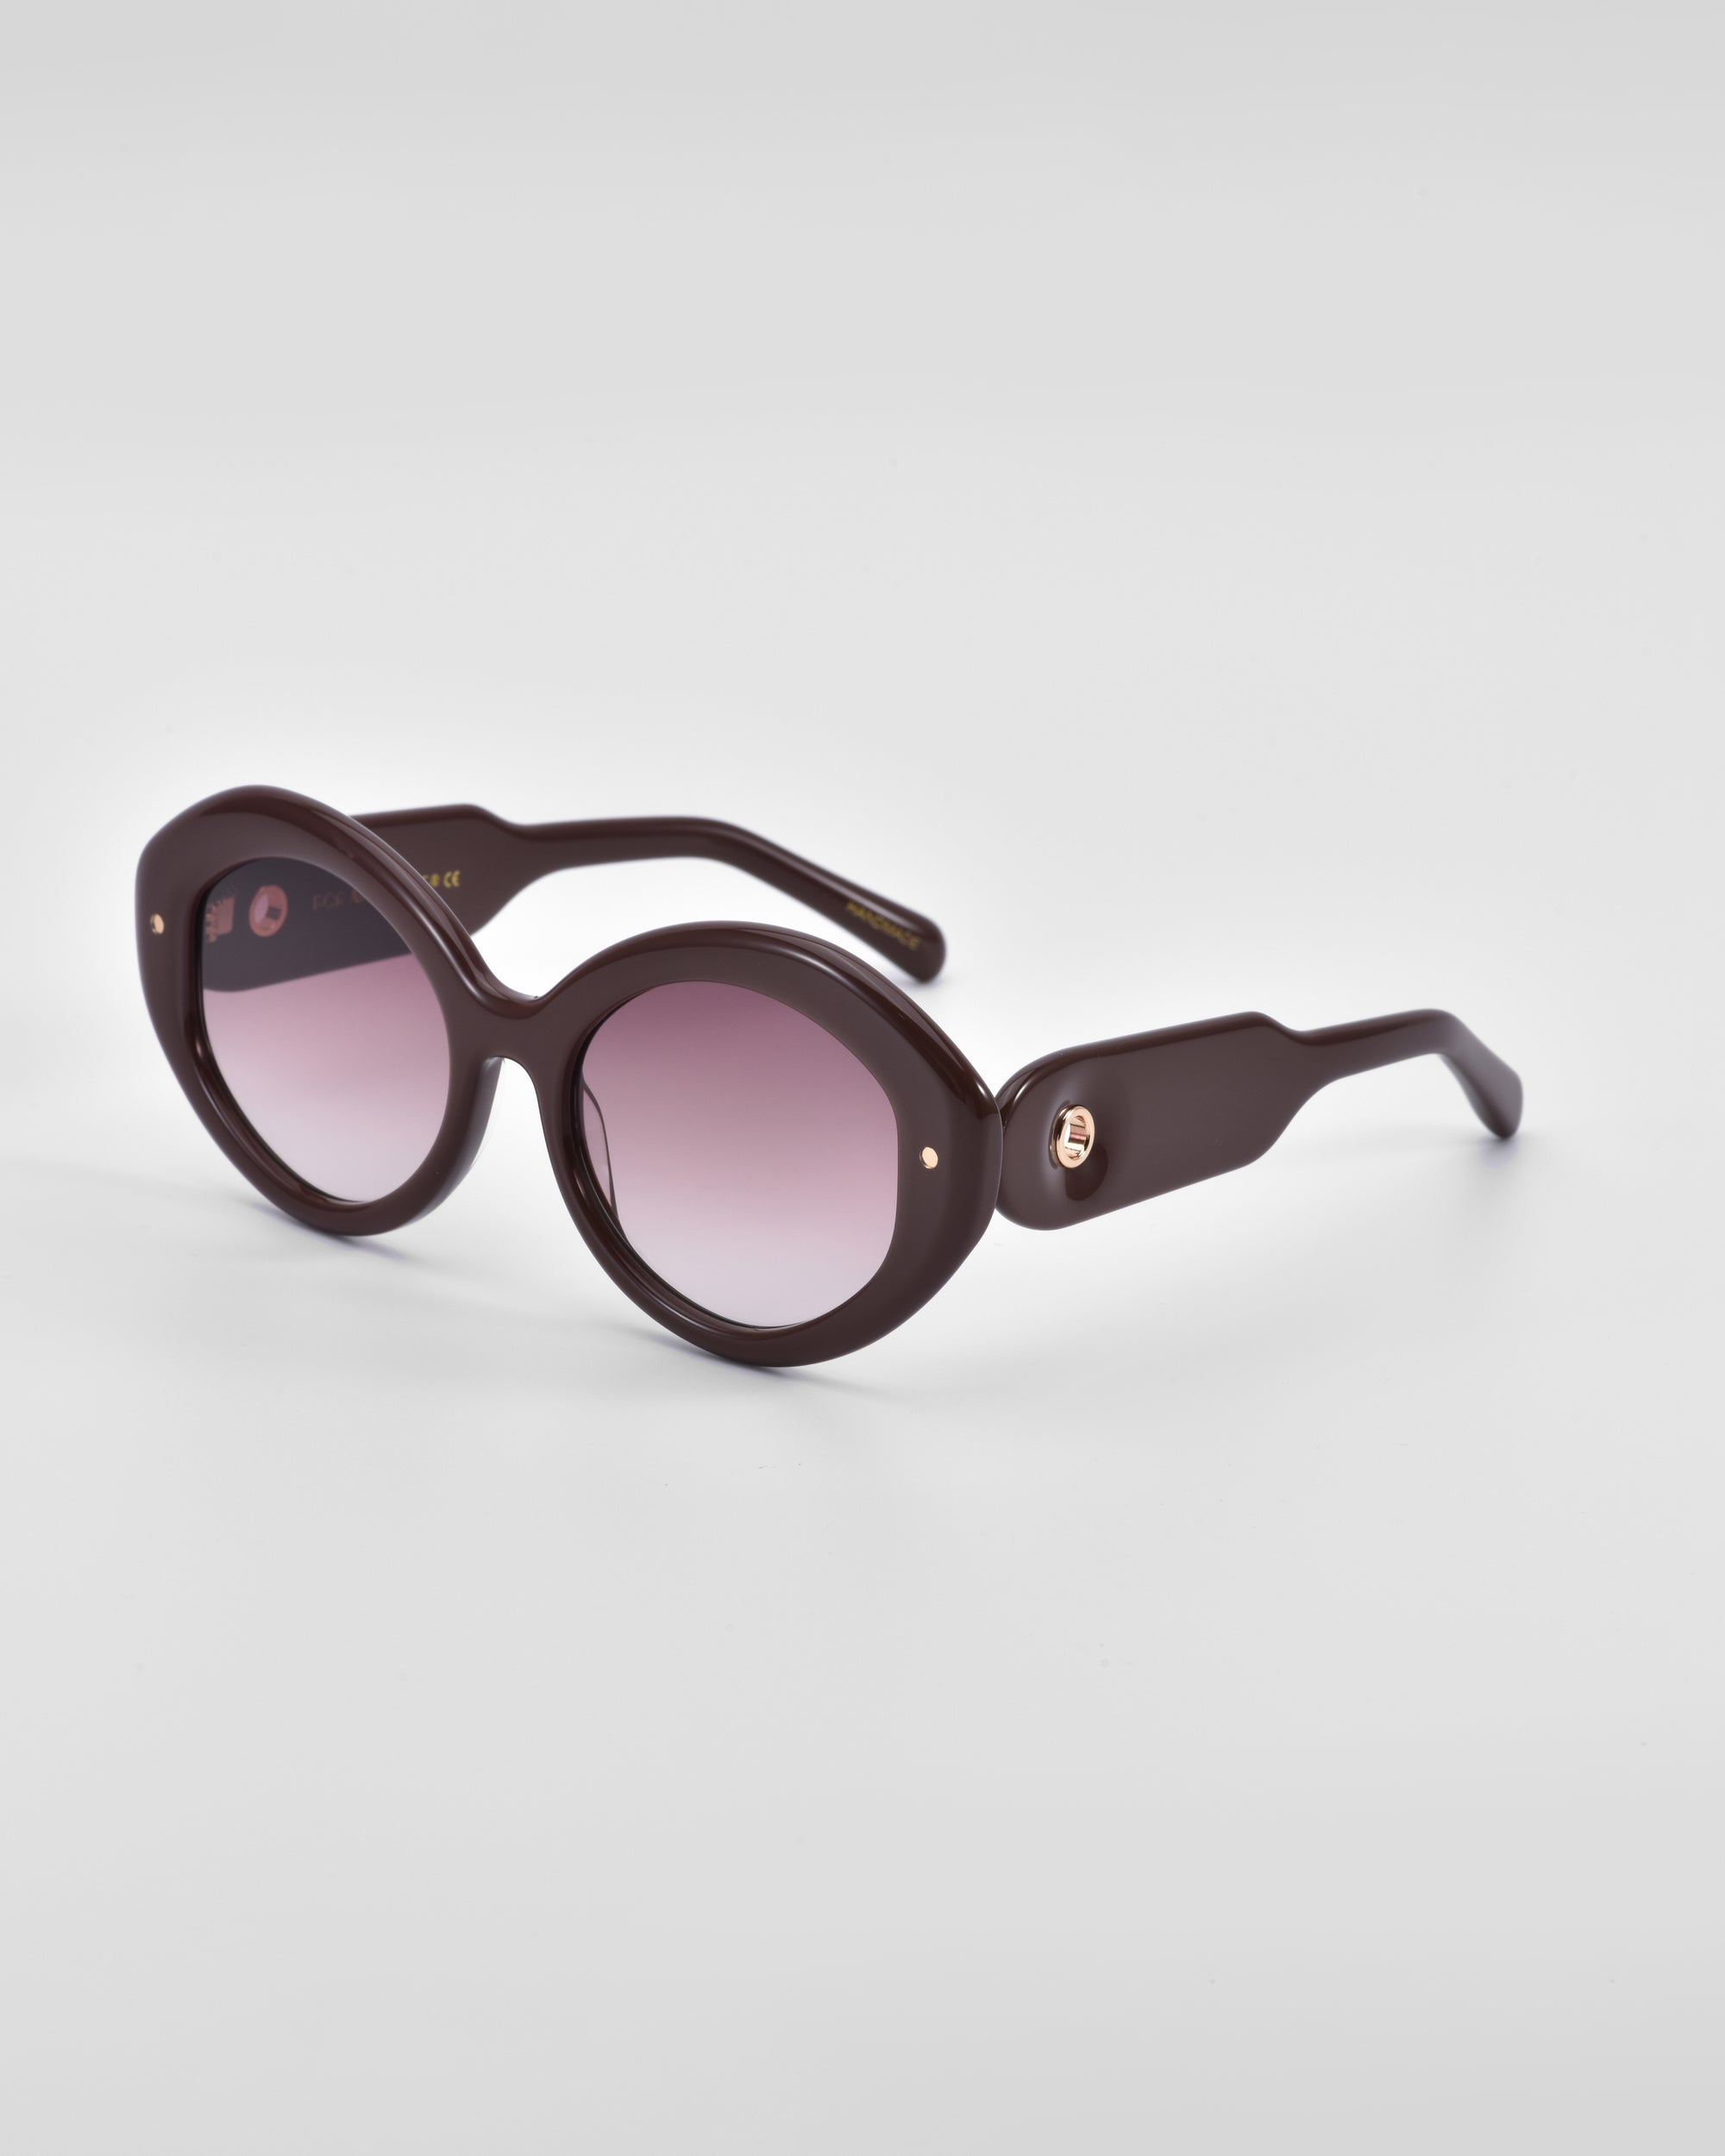 A pair of stylish Helios luxury eyewear by For Art&#39;s Sake® with dark, round lenses and thick, glossy brown frames. The arms of the sunglasses are also thick and contoured, featuring small gold embellishments near the hinges. The background is plain white.